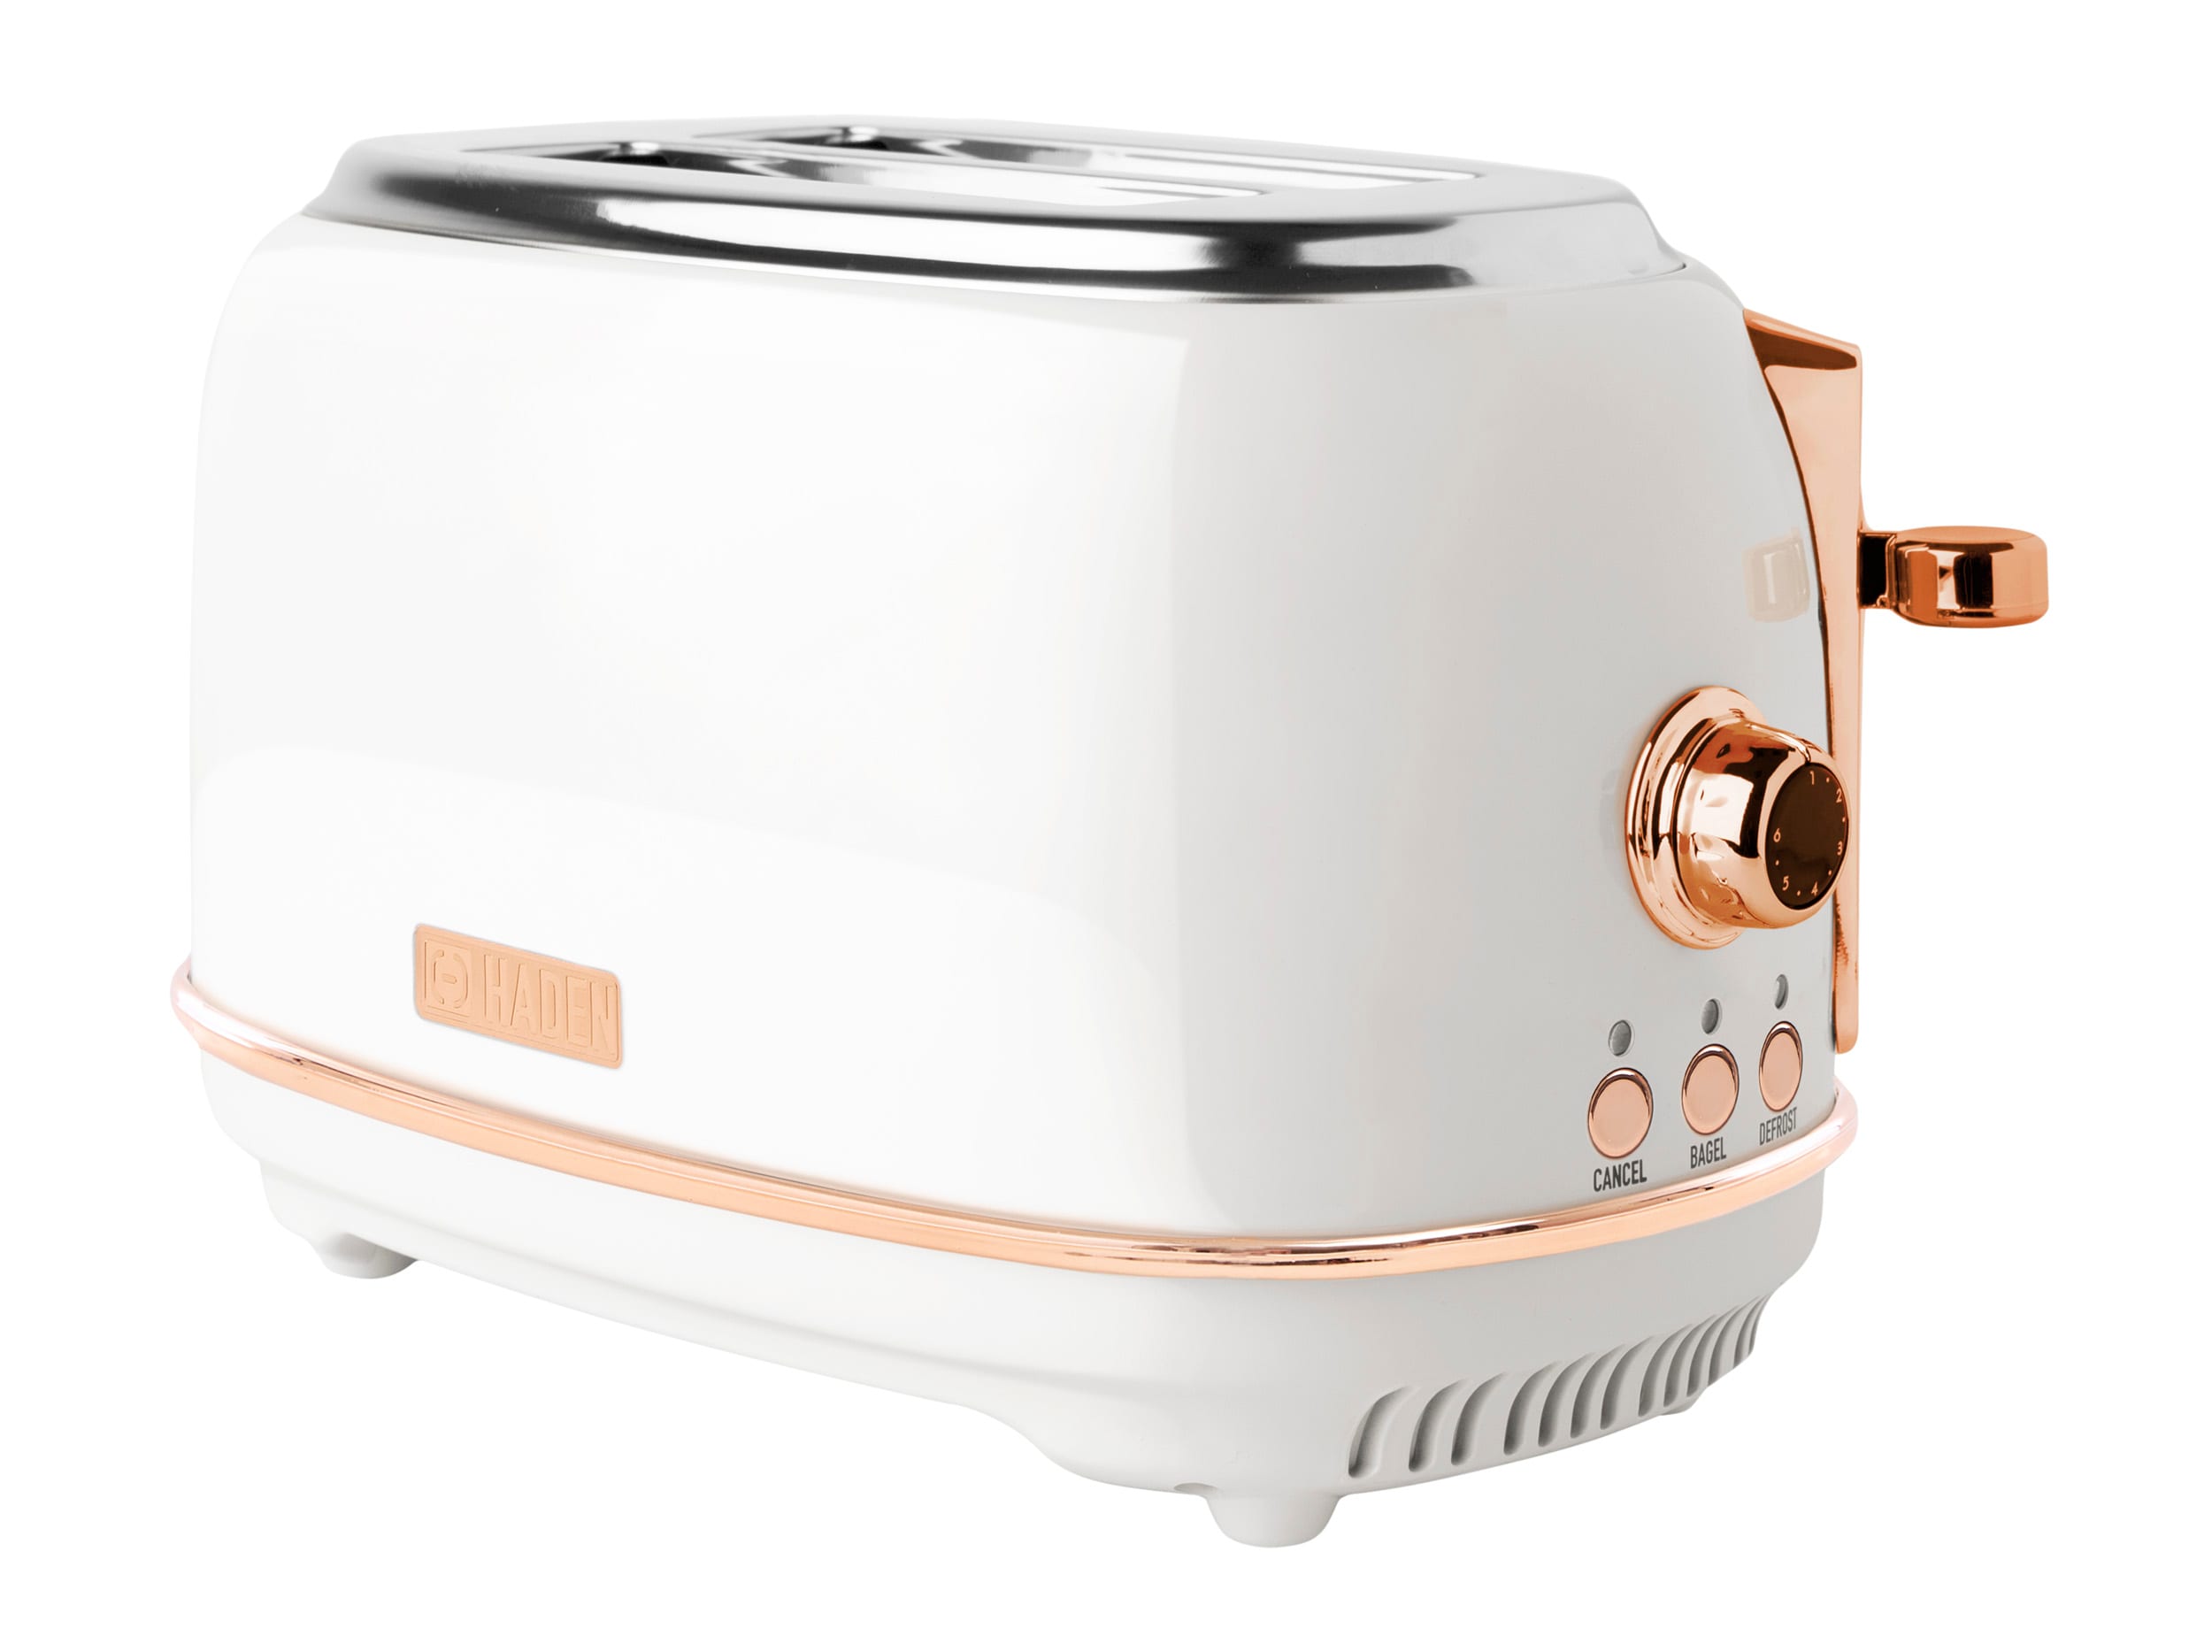 850w 2 Slice Toaster Matte Black Silver Rose Gold Toaster Stainless Steel